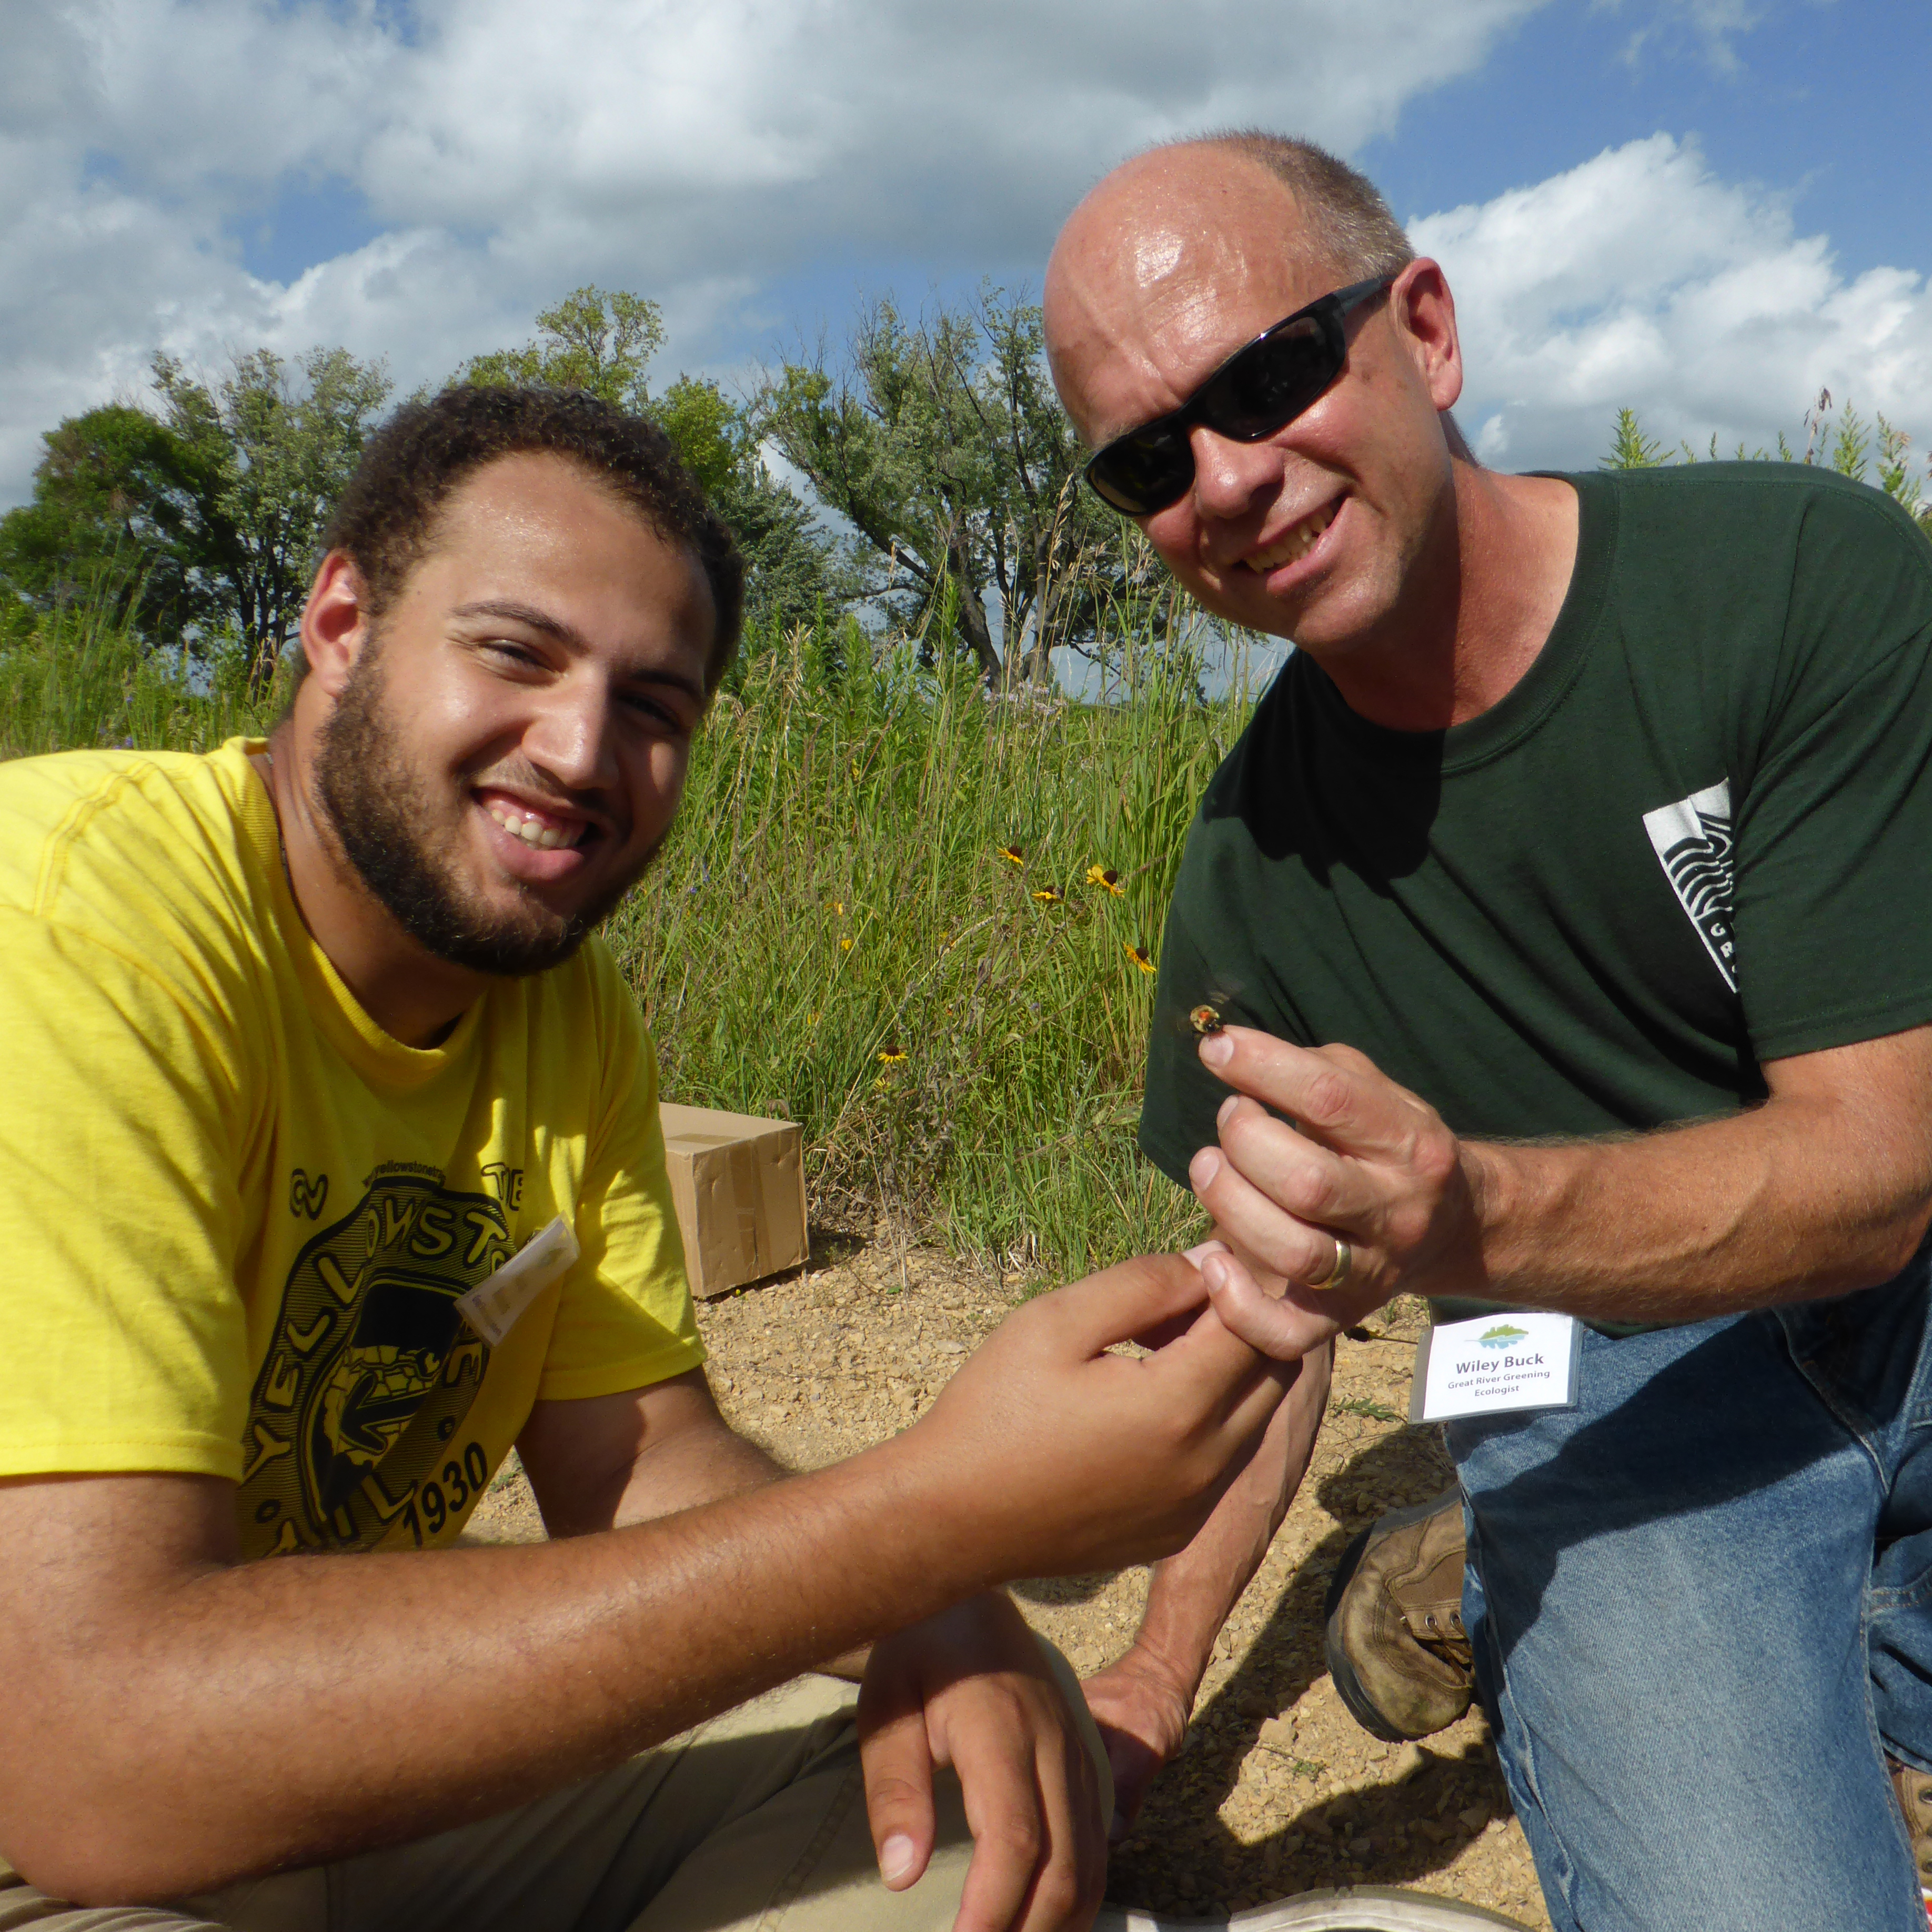 Two people, one a young man with dark skin, and one an older man with pale skin, have their hands close together as they show off a bumble bee they caught as part of a community science effort.